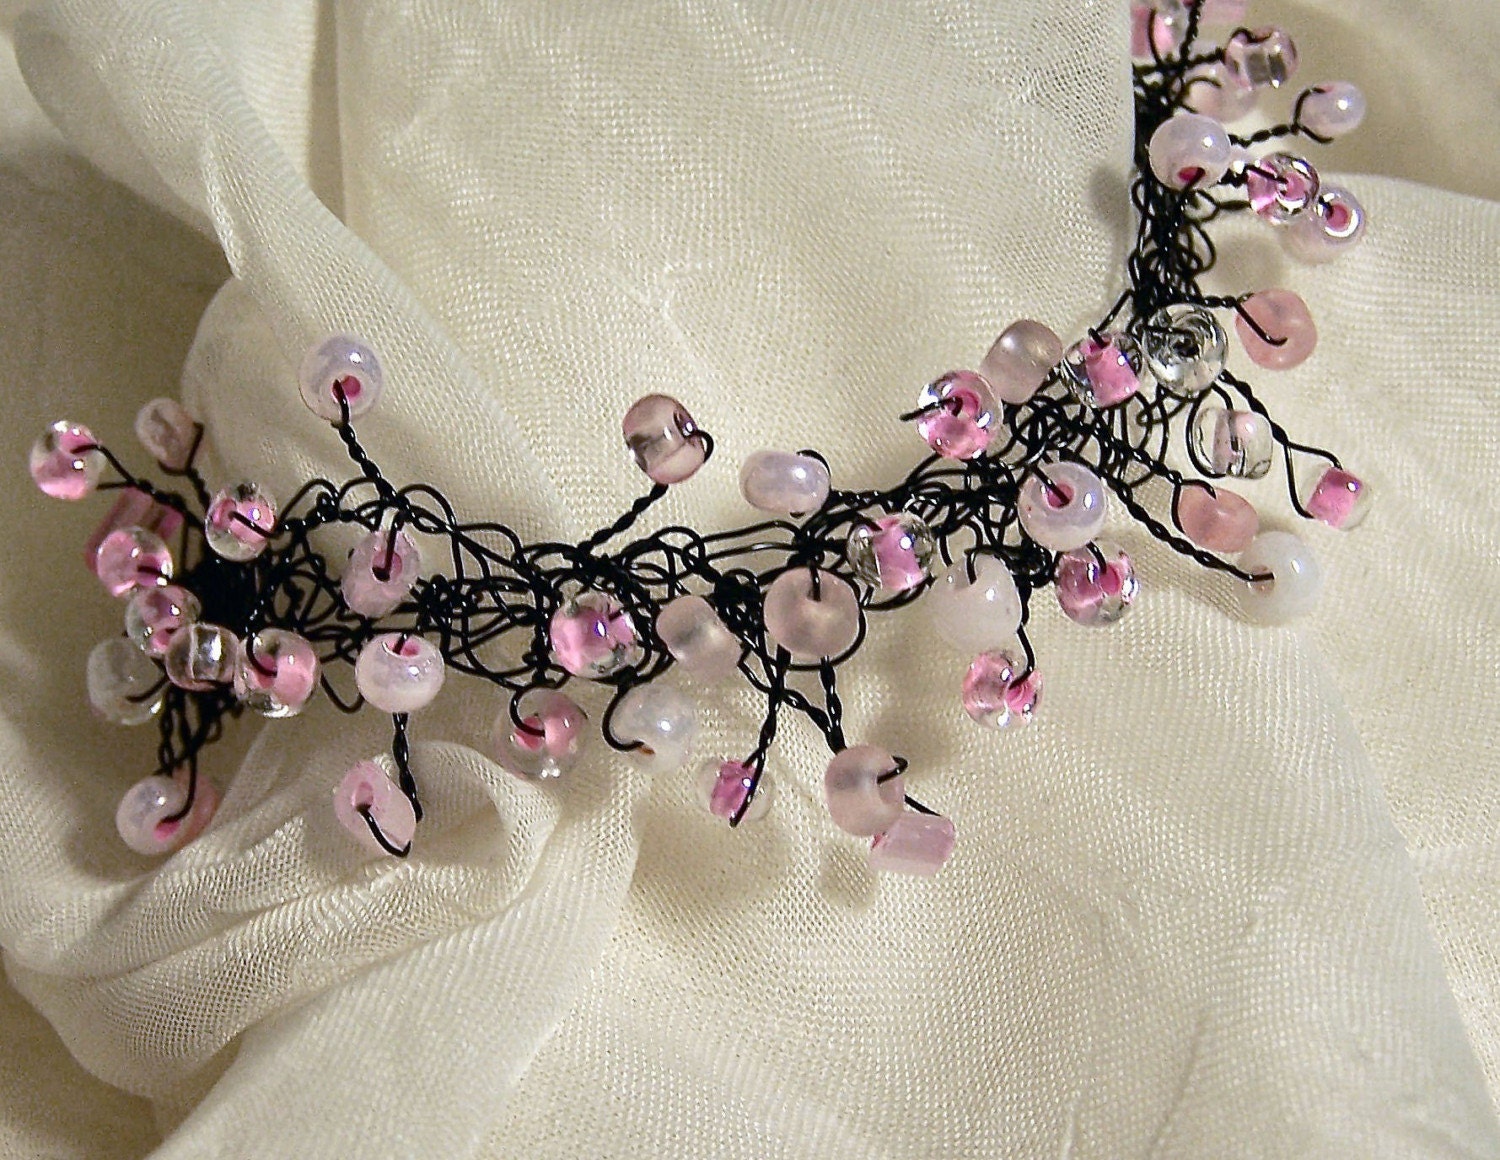 Pretty in pink (and black) wire crocheted bracelet